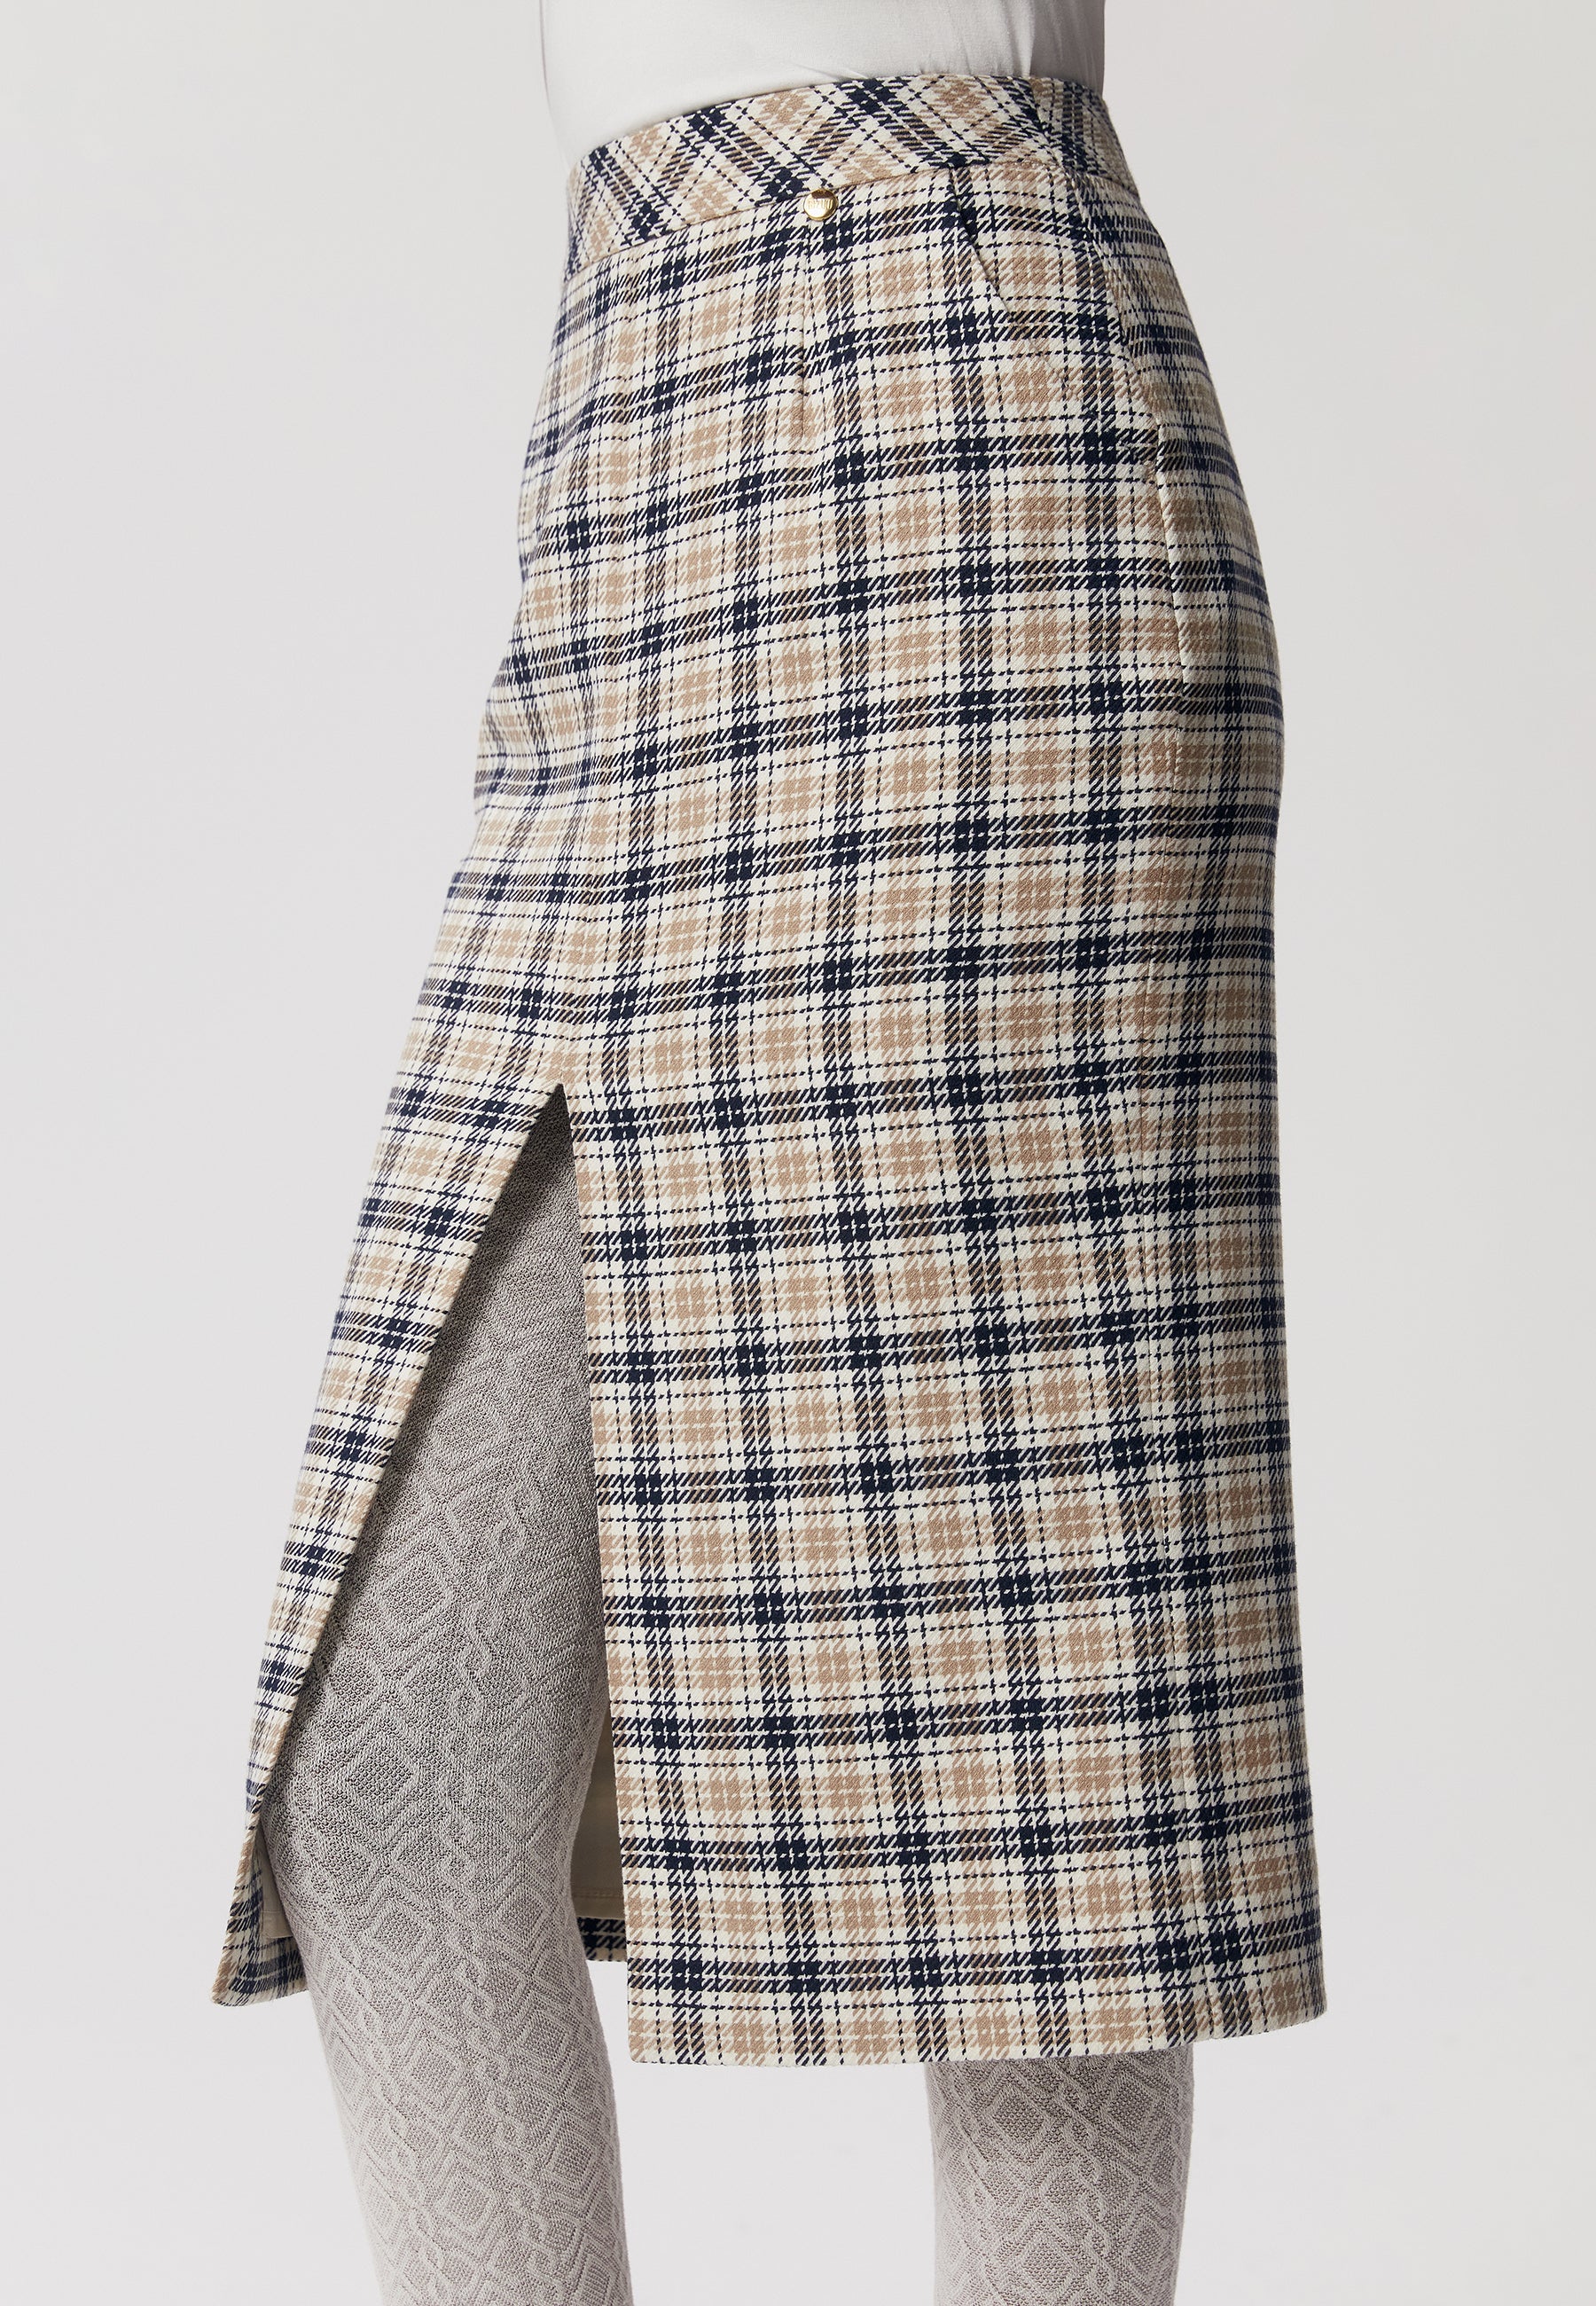 Pencil skirt with slit and checkered pattern LIEGO in cream